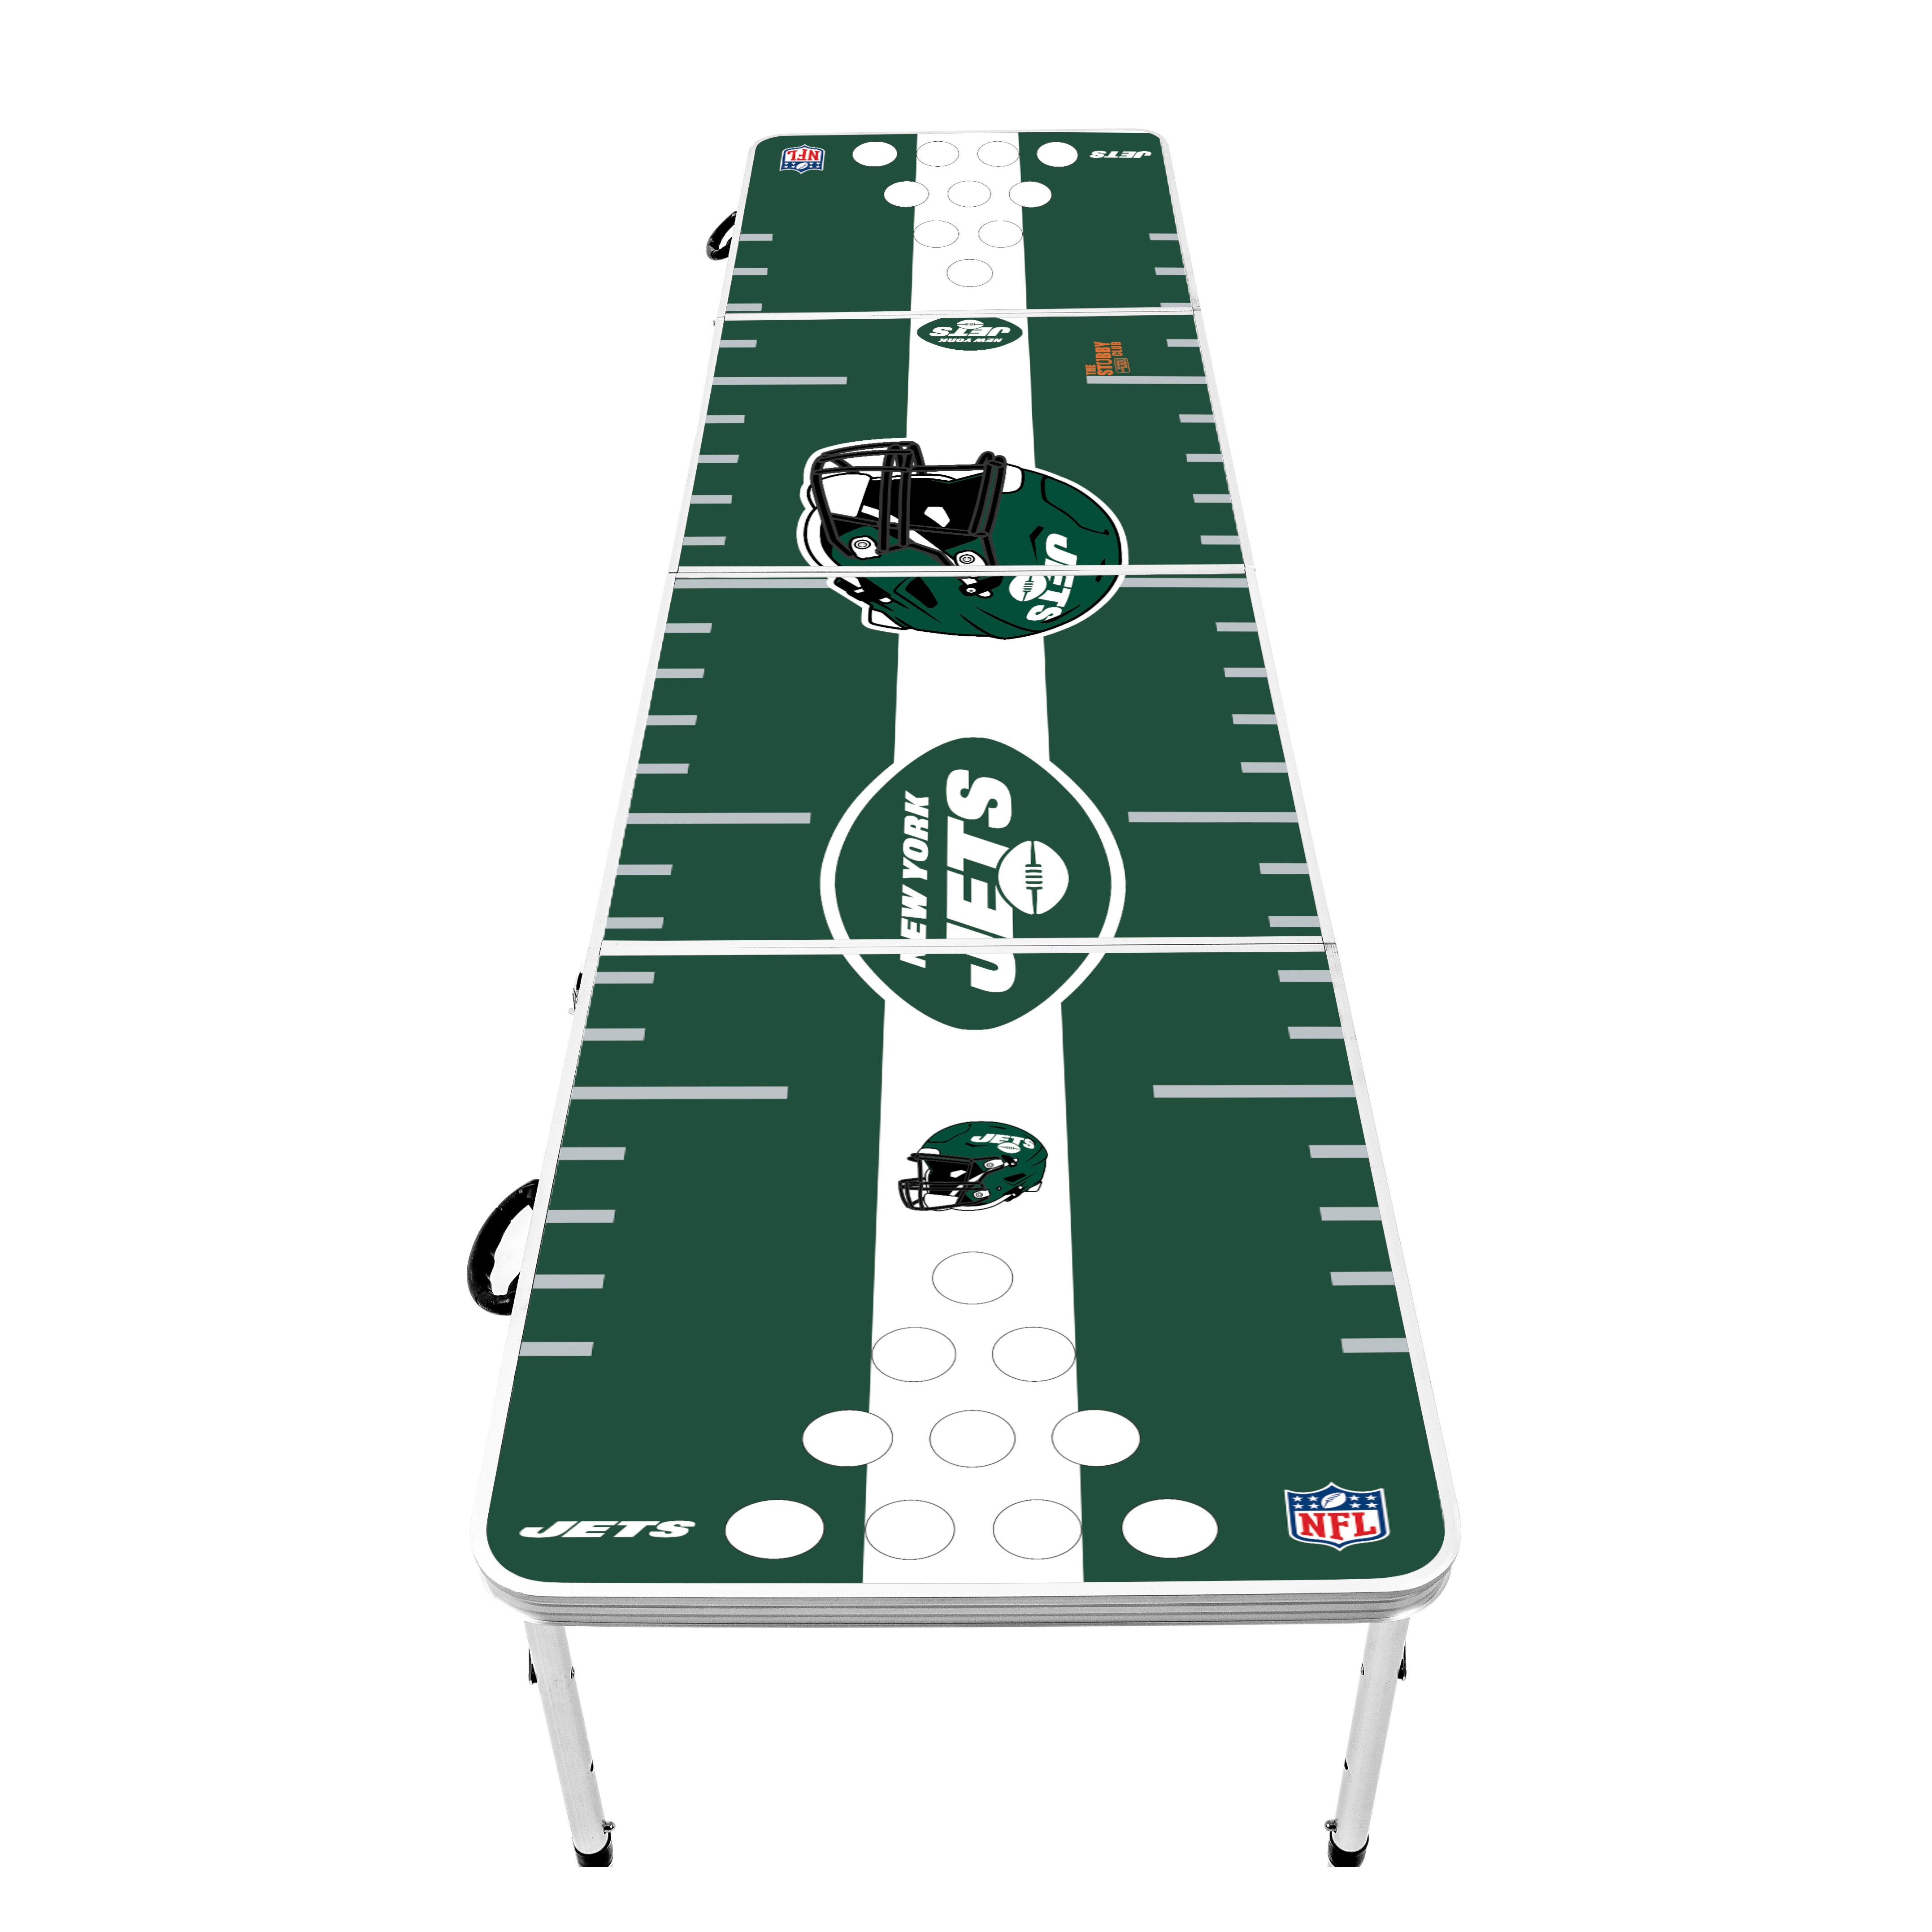 New York Jets NFL Beer Pong Table